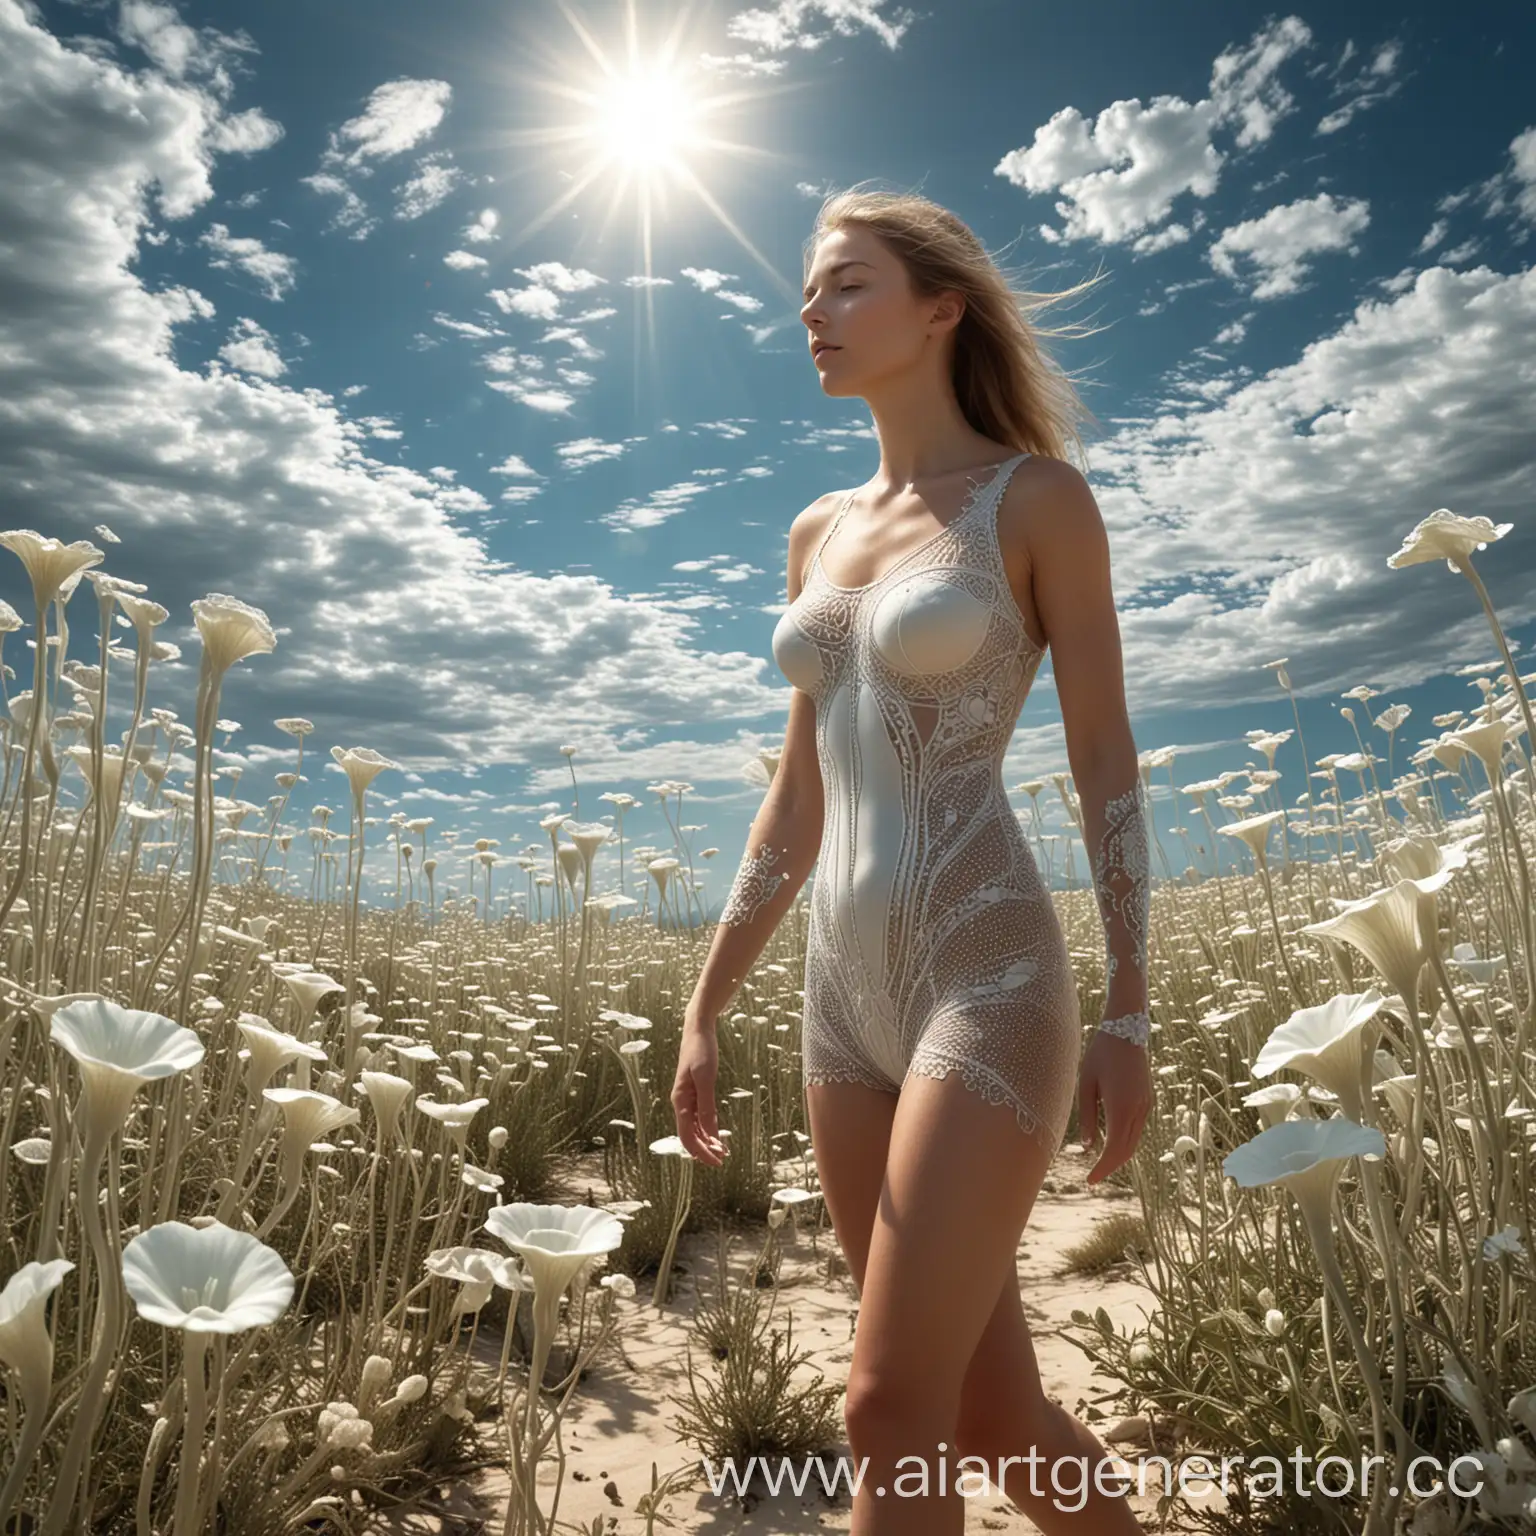 Enlarged-Fractals-and-Diatoms-in-Alien-Landscape-with-Beauty-Woman